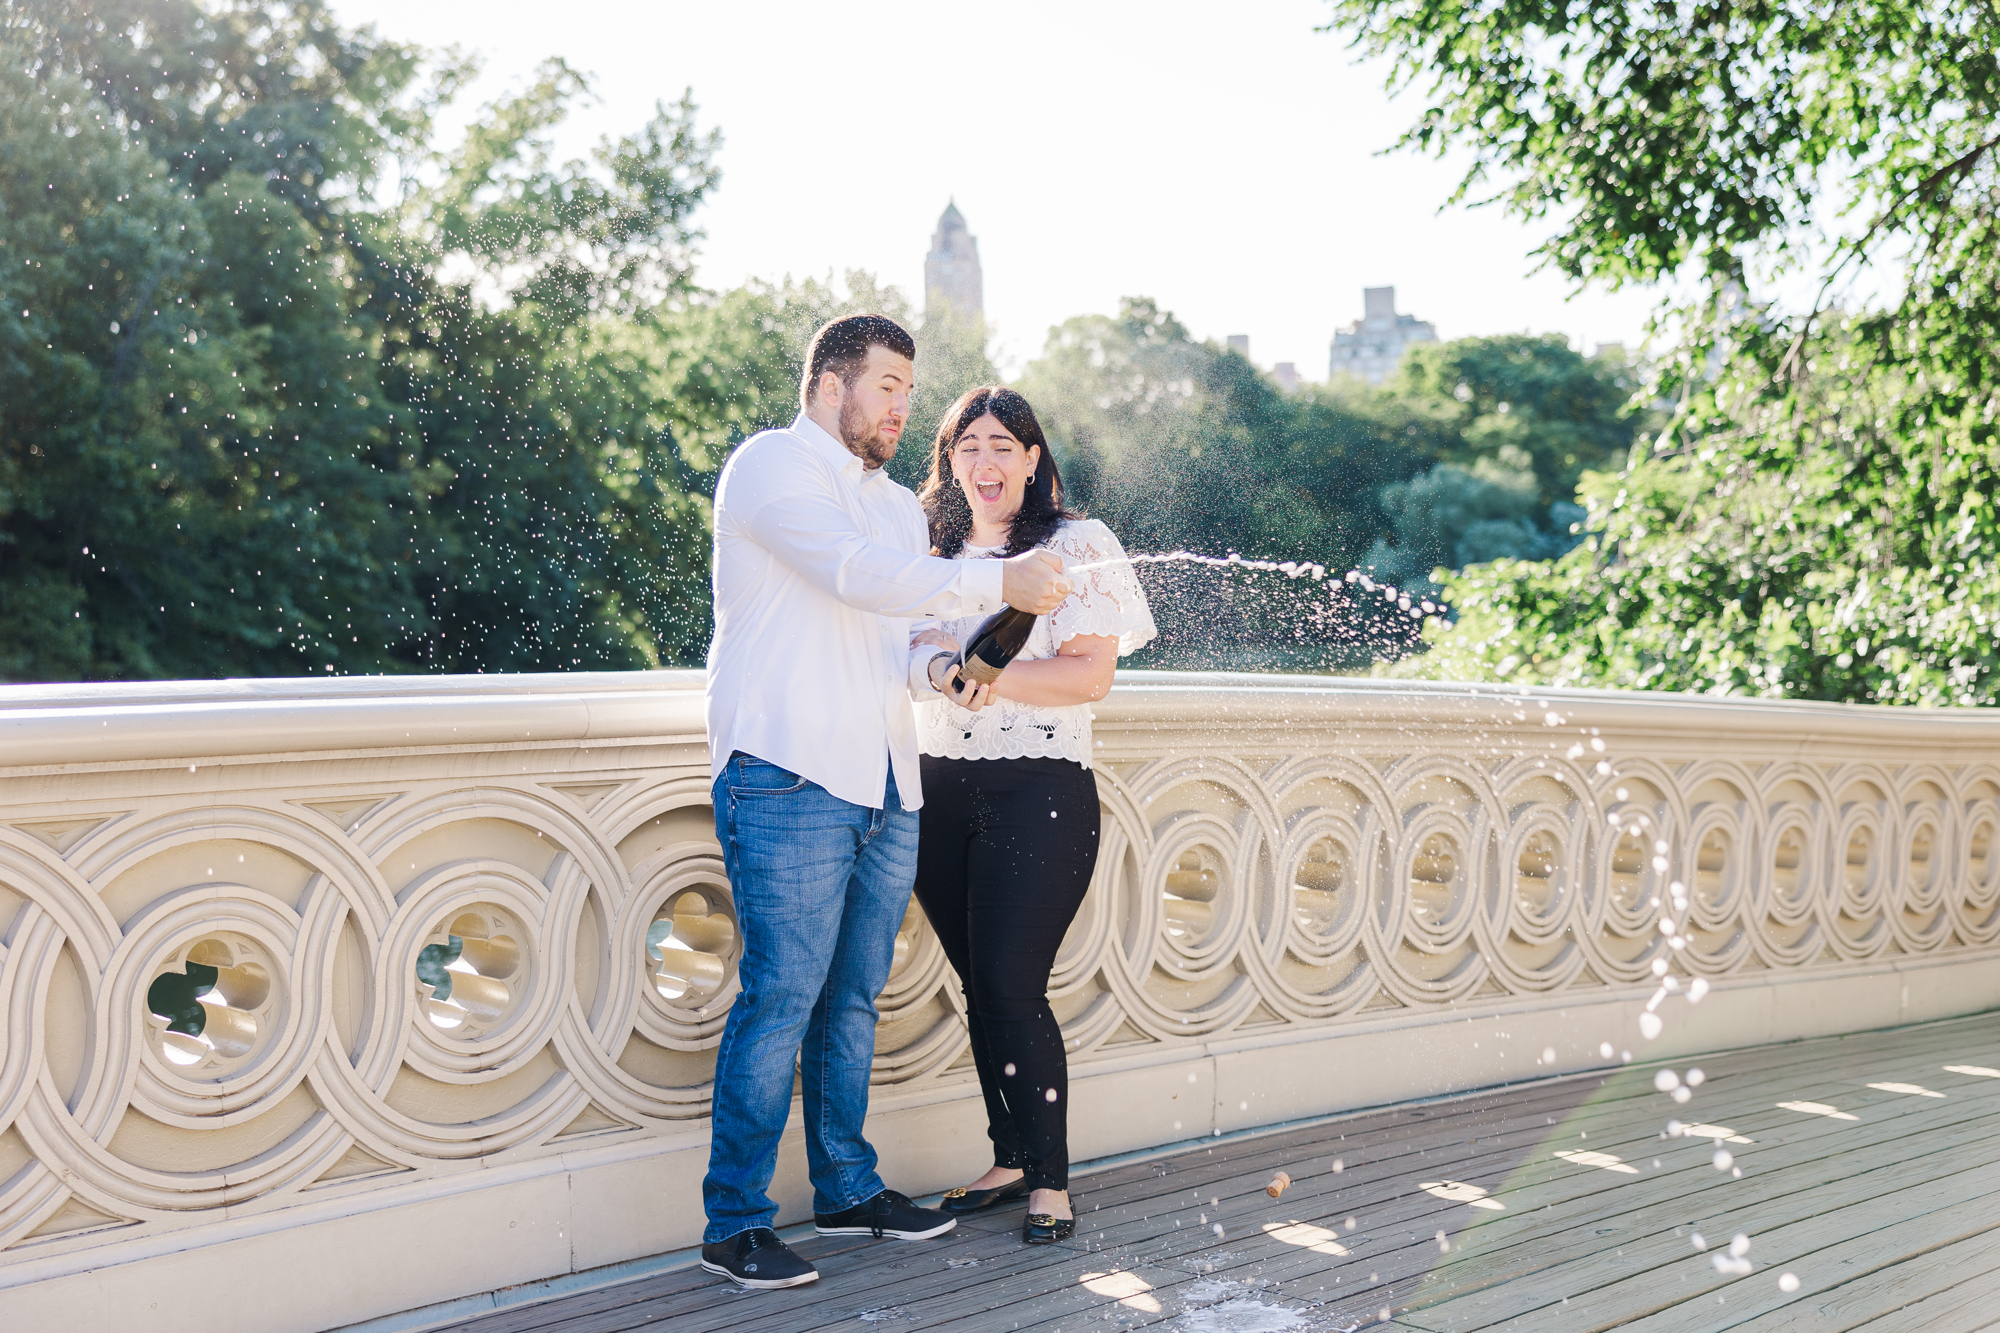 Beautiful Central Park Engagement Photos in New York